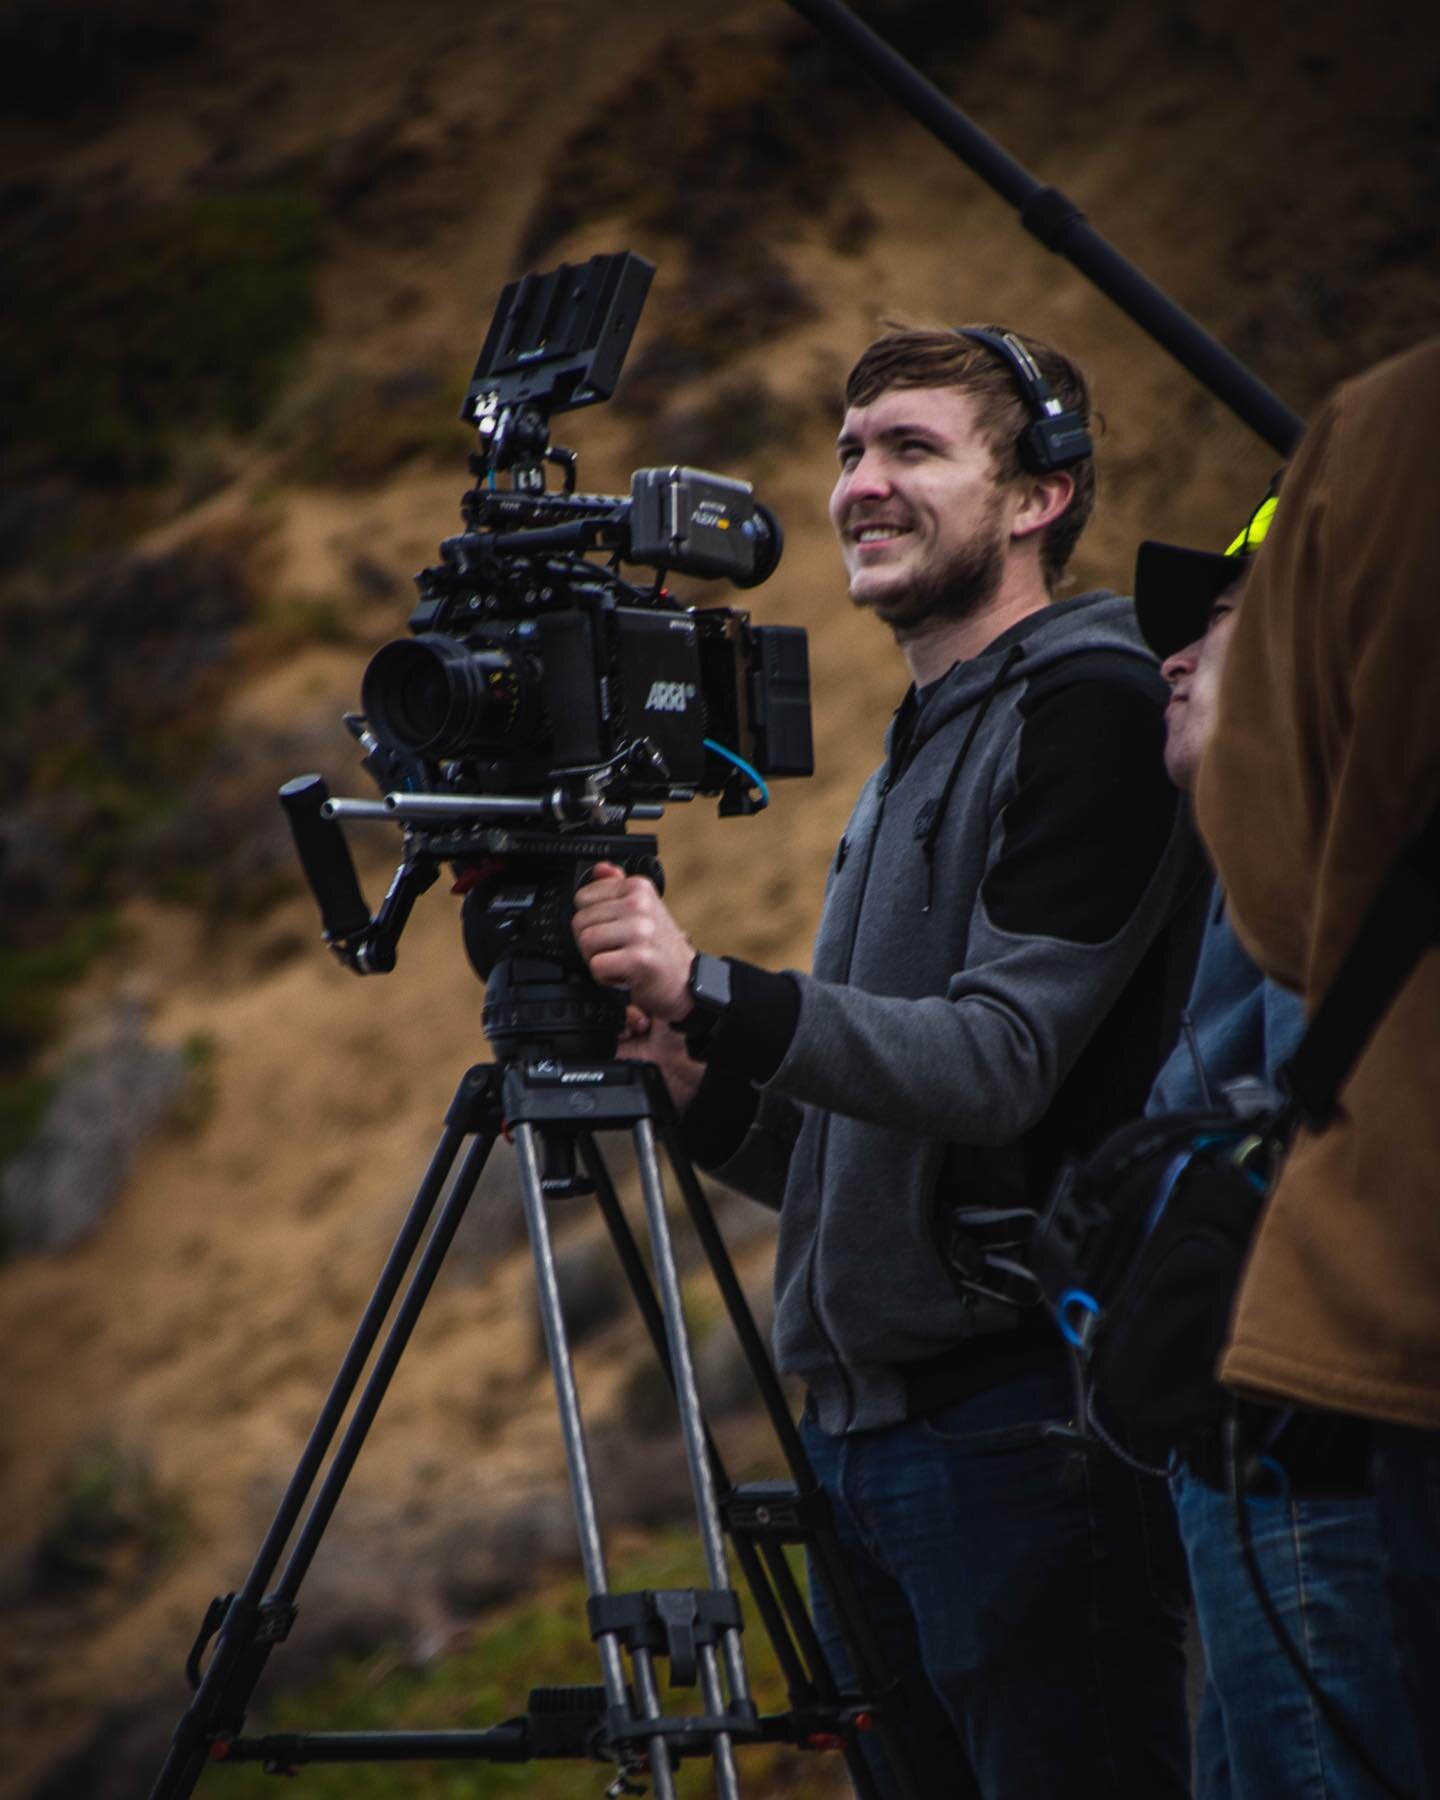 Meet your friendly neighborhood DP🎬🎥

I had the amazing opportunity to be the cinematographer for @dil.loncox film and it was an absolute blast. He gathered some of the best and most ambitious people to help out, and it was a group that I hope to n